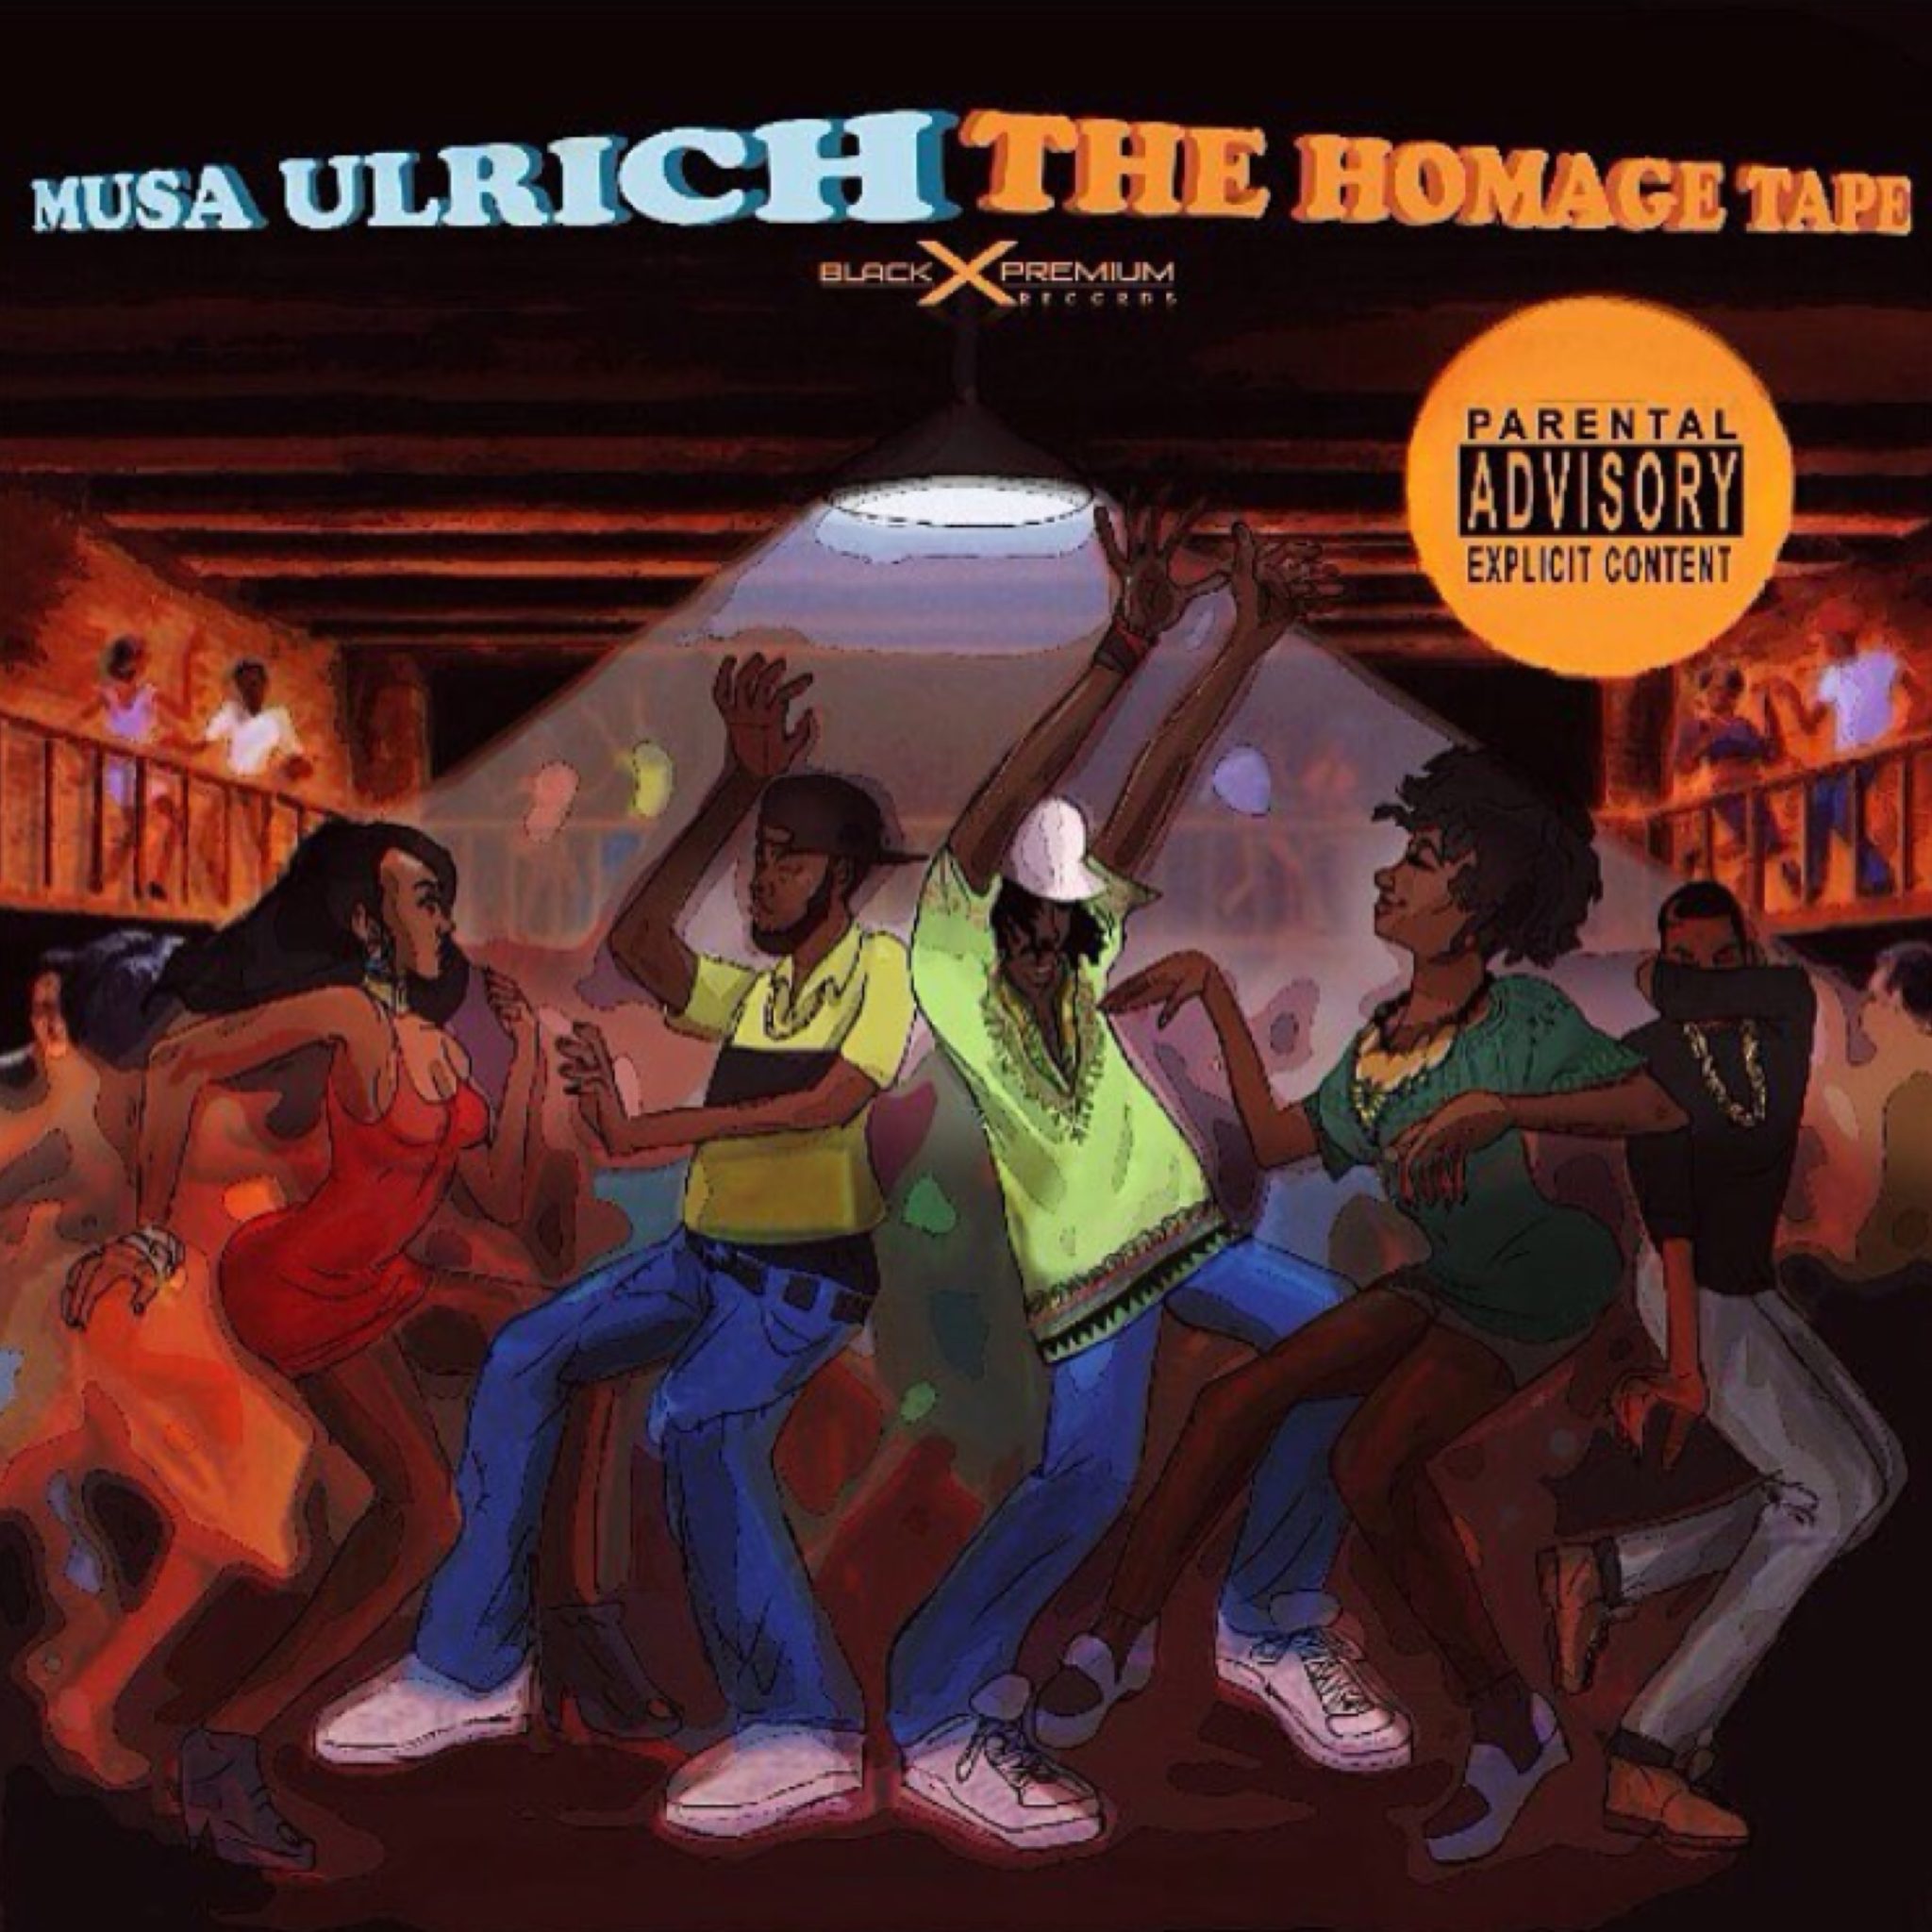 Musa Ulrich - "The Homage Tape" (Mixtape)